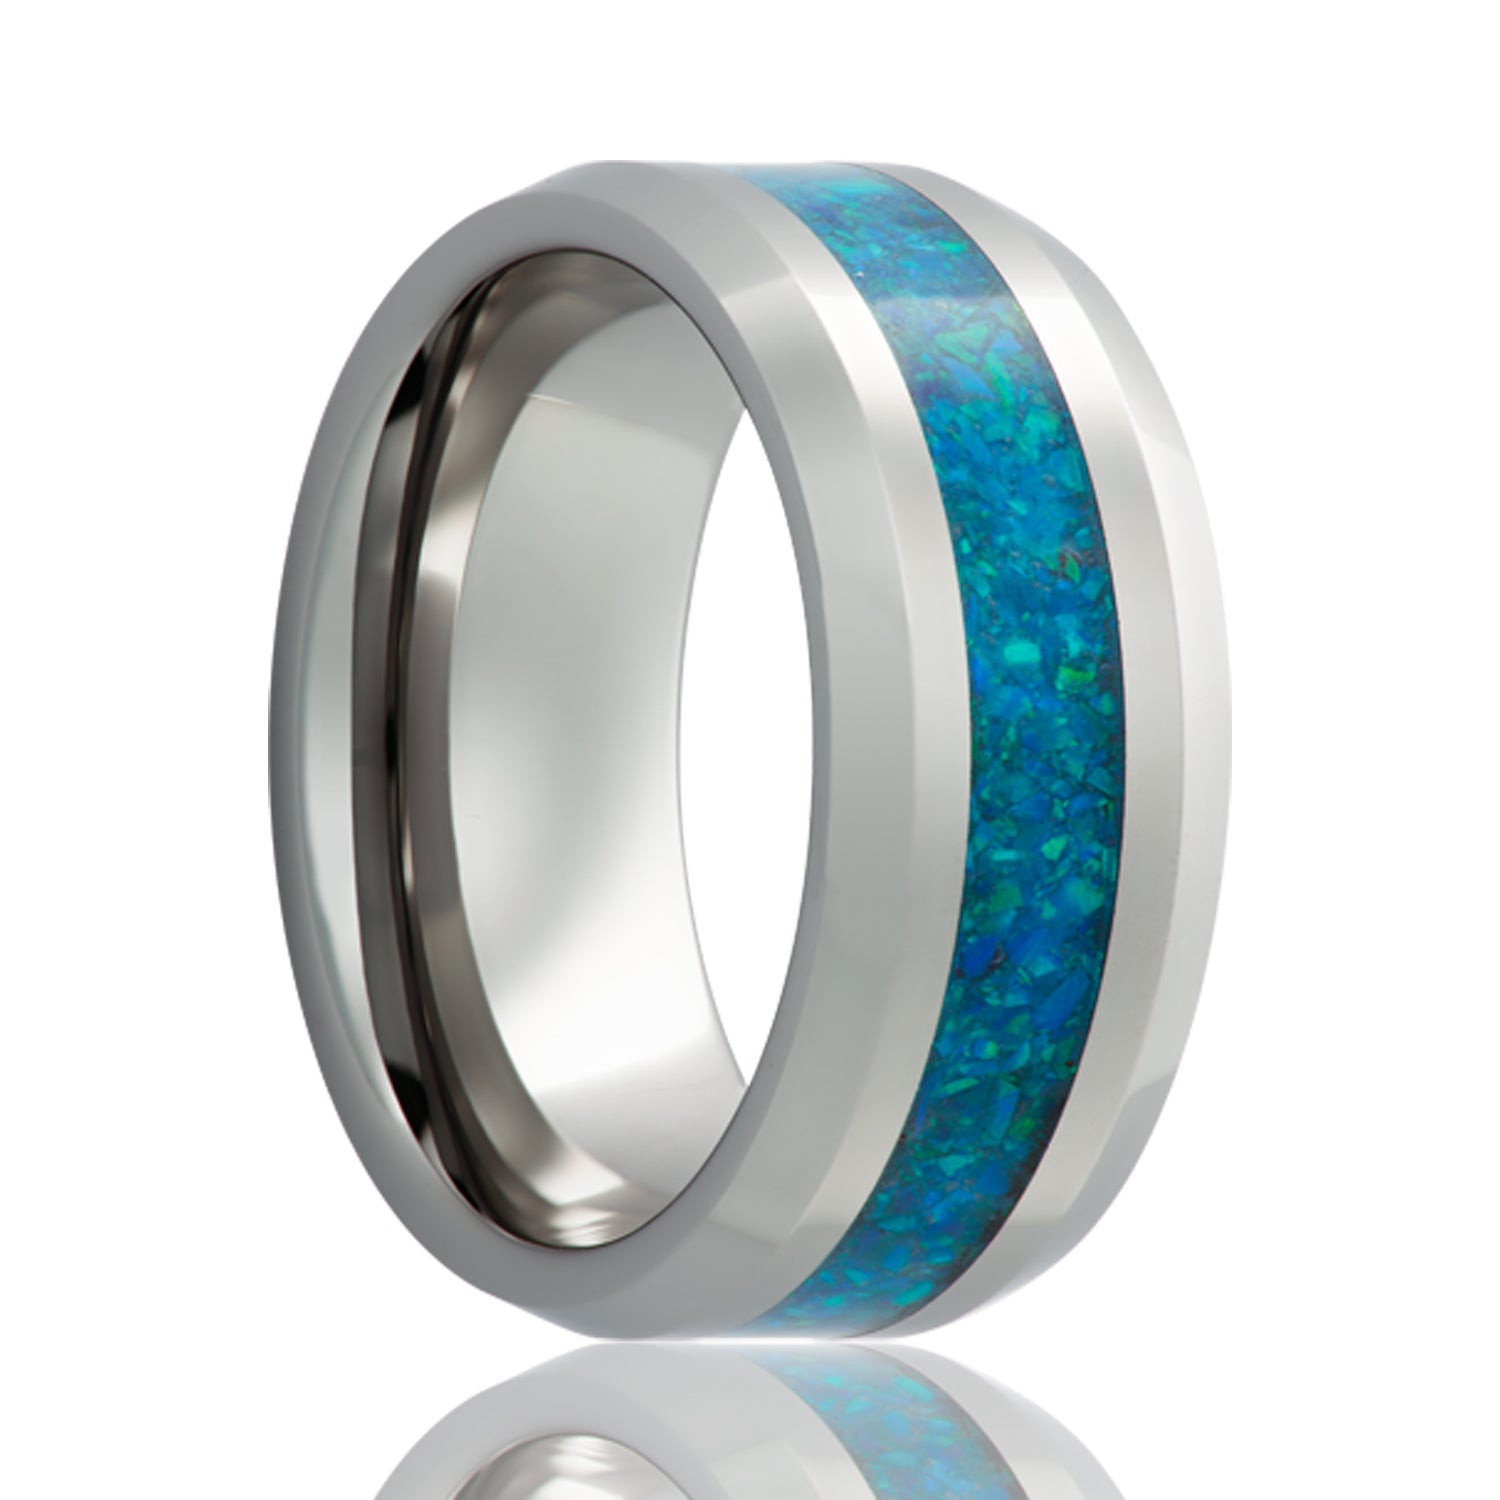 Blue Opal Inlay Tungsten Wedding Band with Beveled Edges